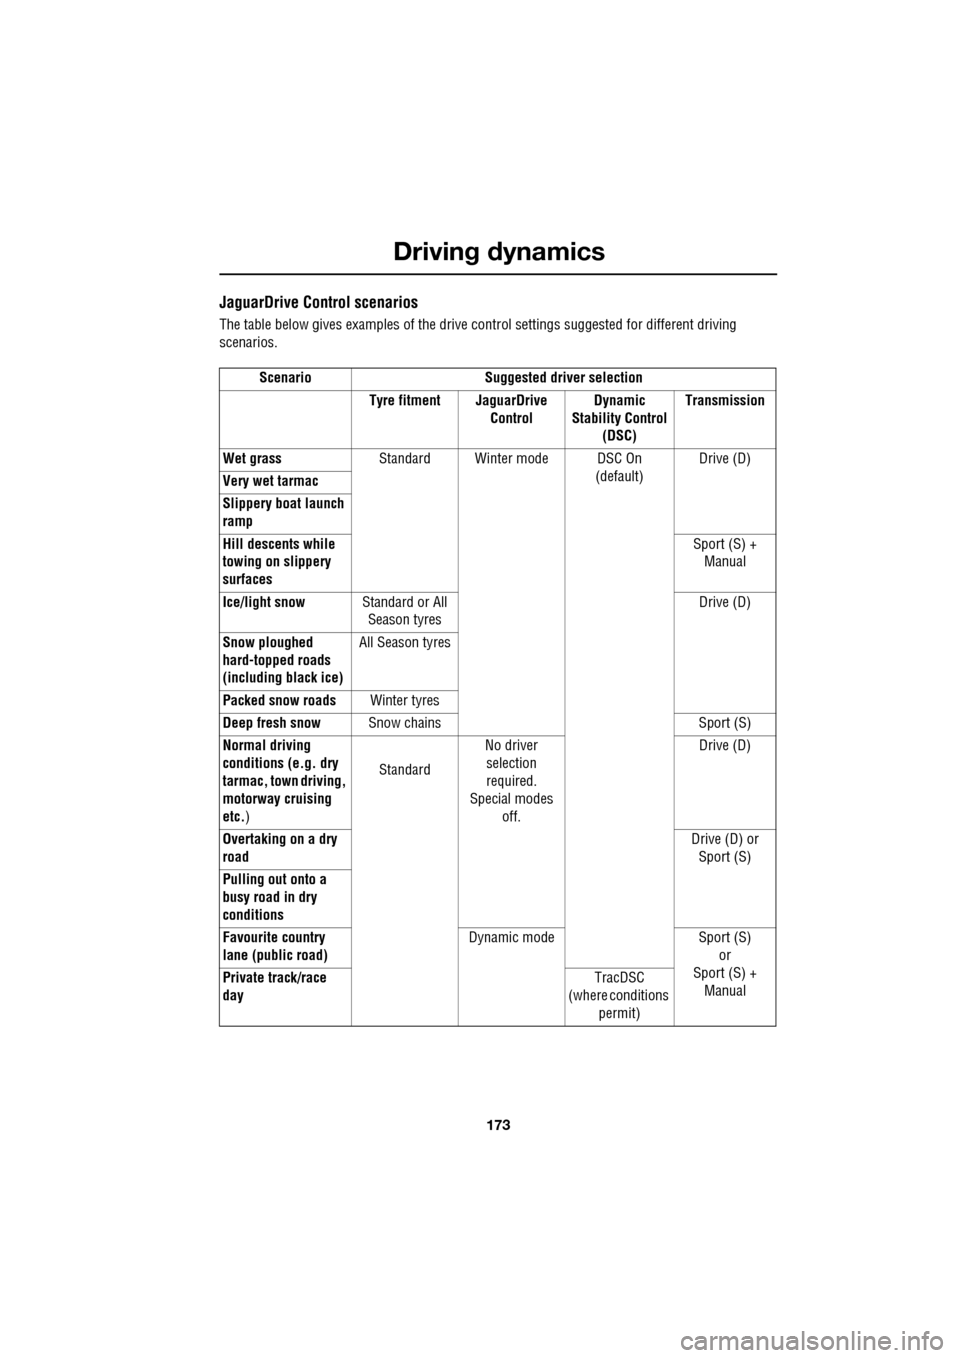 JAGUAR XF 2009 1.G Owners Manual 173
Driving dynamics
               
JaguarDrive Control scenarios
The table below gives examples of the drive control settings suggested for different driving 
scenarios.
Scenario Suggested driver se